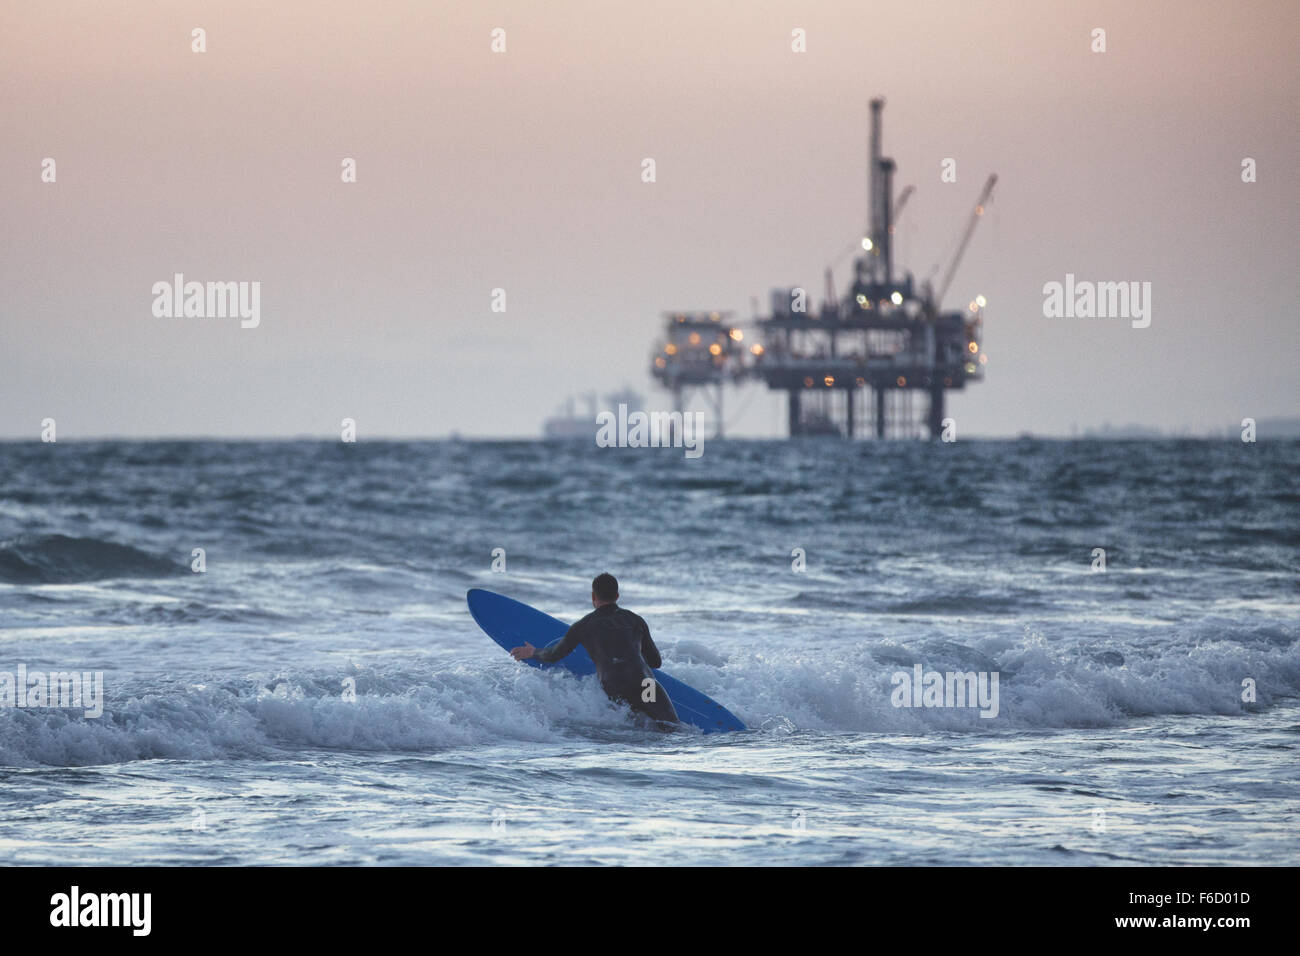 The surfer going into the water. Stock Photo